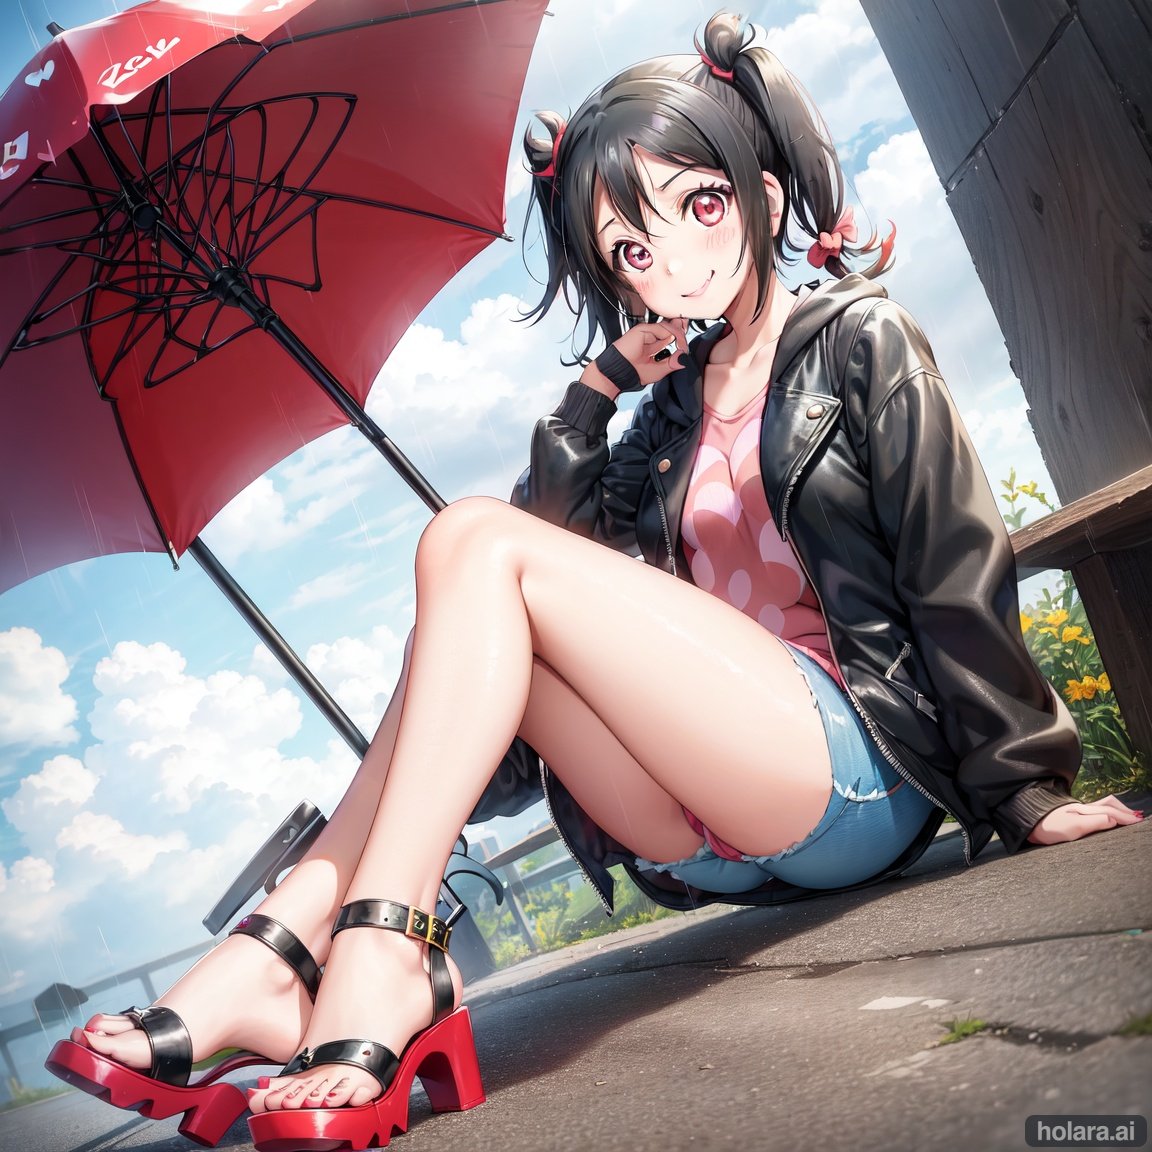 (nico yazawa)+++,(lovelive)+++,1girl,solo,smile,cheerful,(pigtails)+++,leather jacket,(dark blue hoodie)++,(denim shorts)+,(high heel sandals)++,(scarlet colored eyes)+++,(black hair)+++, looking at camera,sitting on bench,umbrella over head,rainy,cloudy